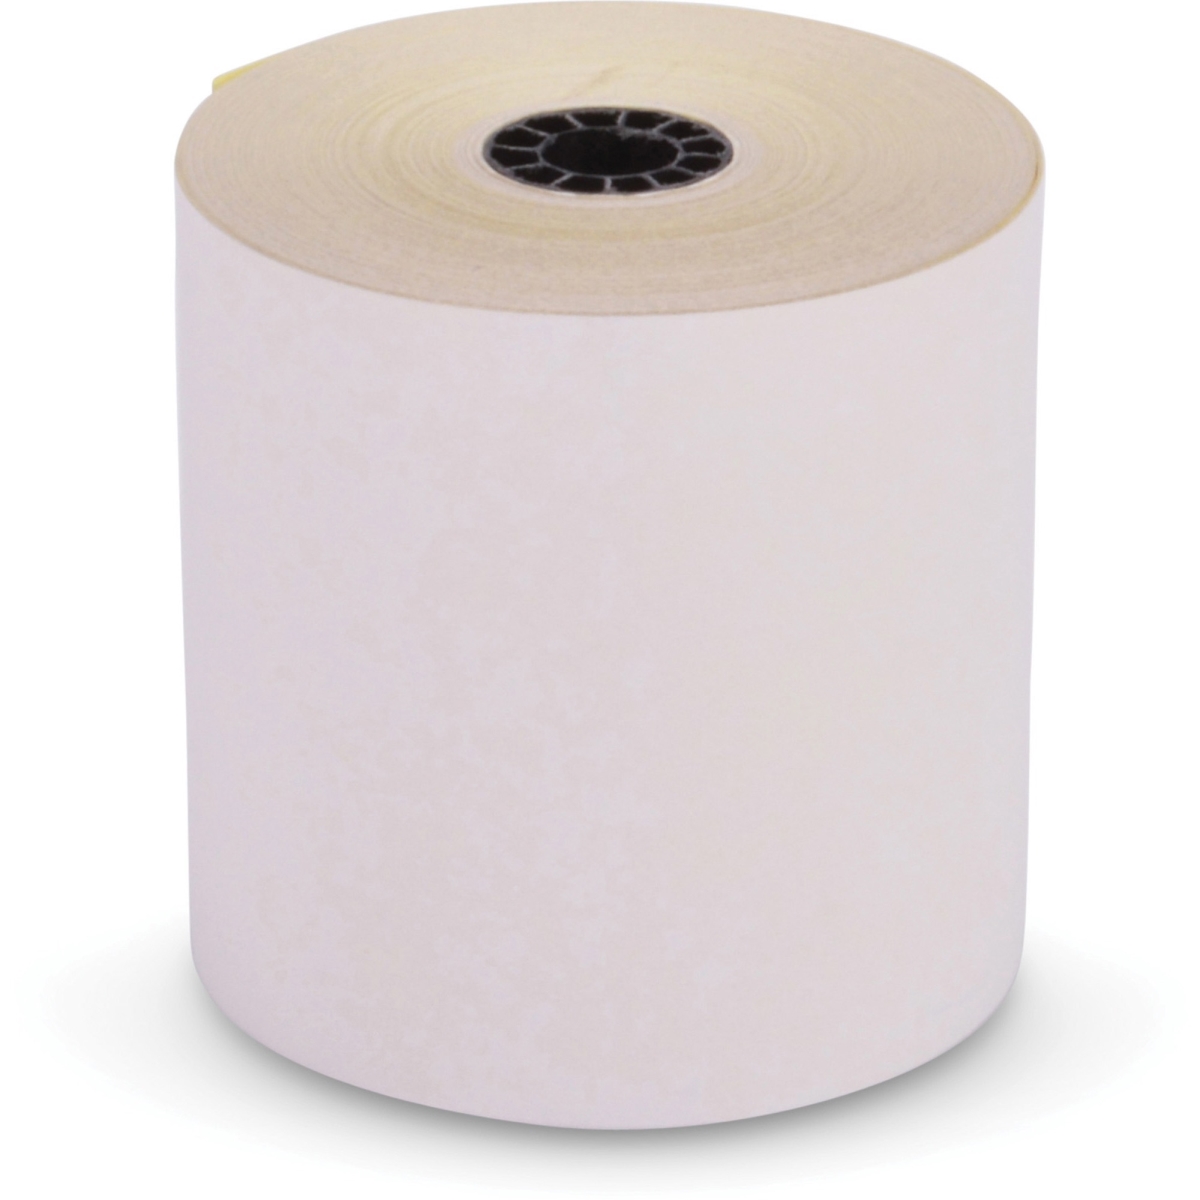 Iconex Icx90770441 2.25 In. Carbonless Print Paper Receipt Roll, White